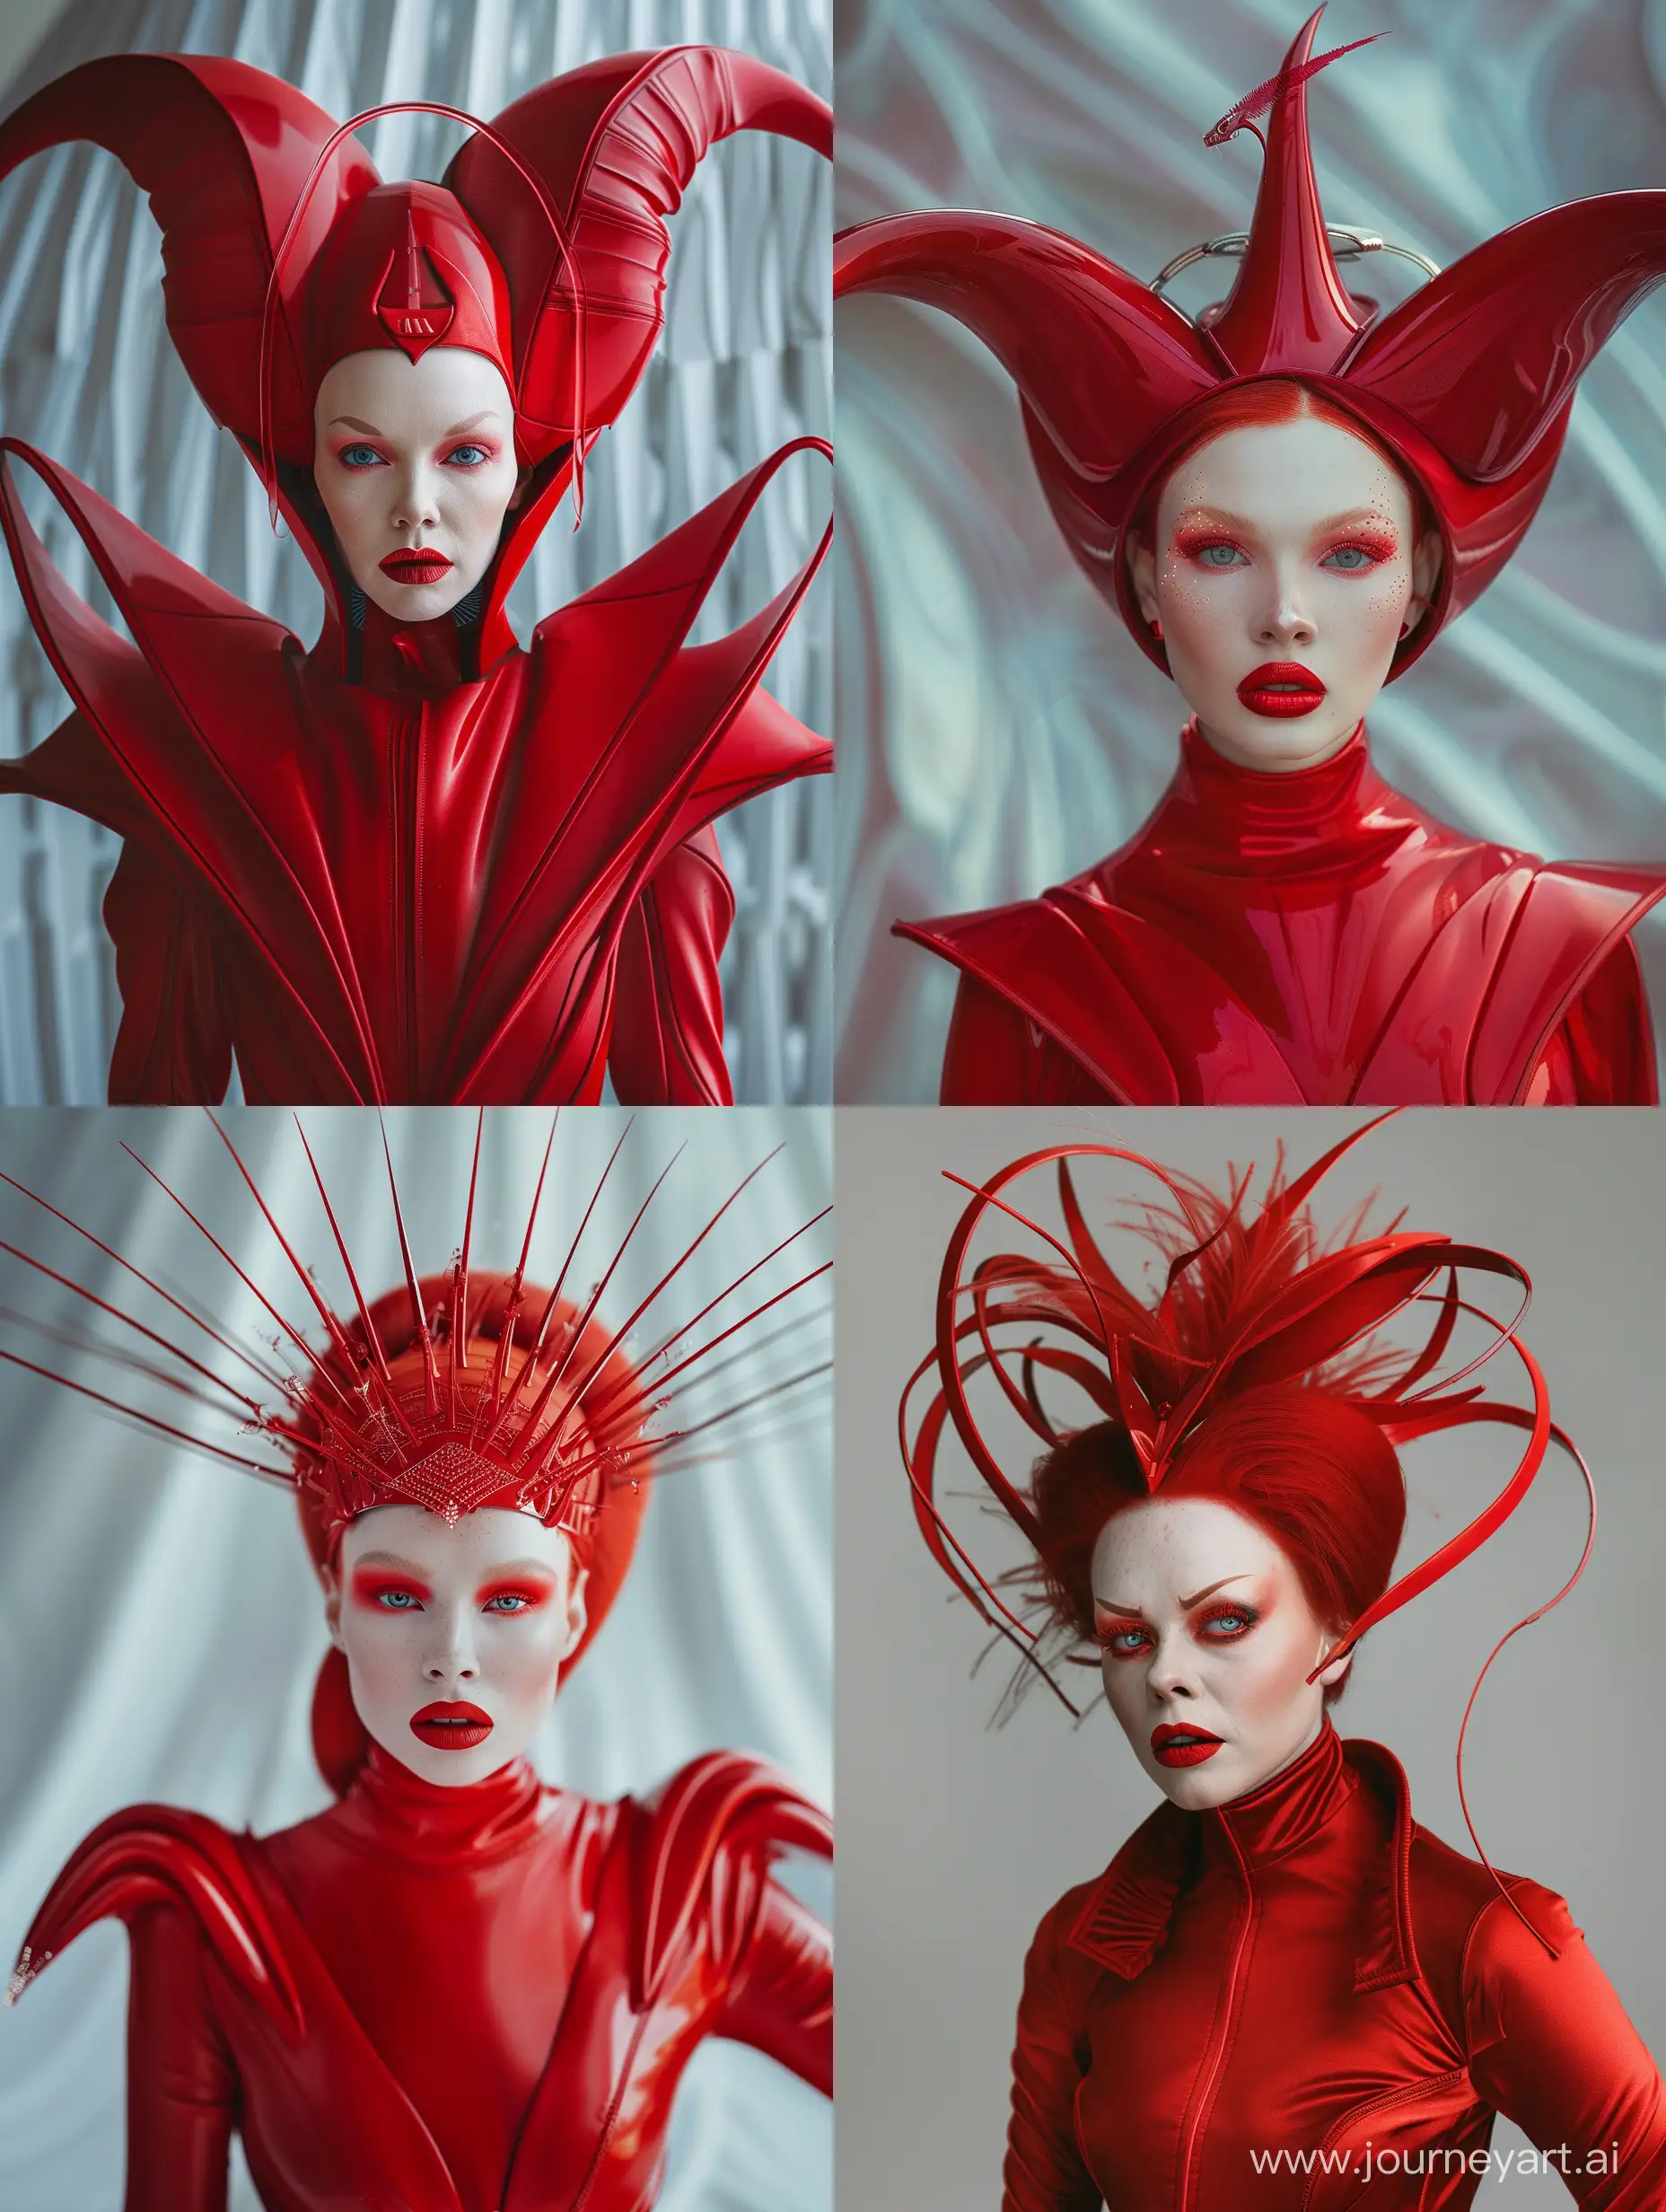 A beautiful redhead female pop artist all red sleek futuristic outfit, with huge headpiece center piece, clean makeup, with depth of field, fantastical edgy and regal themed outfit, captured in vivid colors, embodying the essence of fantasy, minimalist, film grain. V6